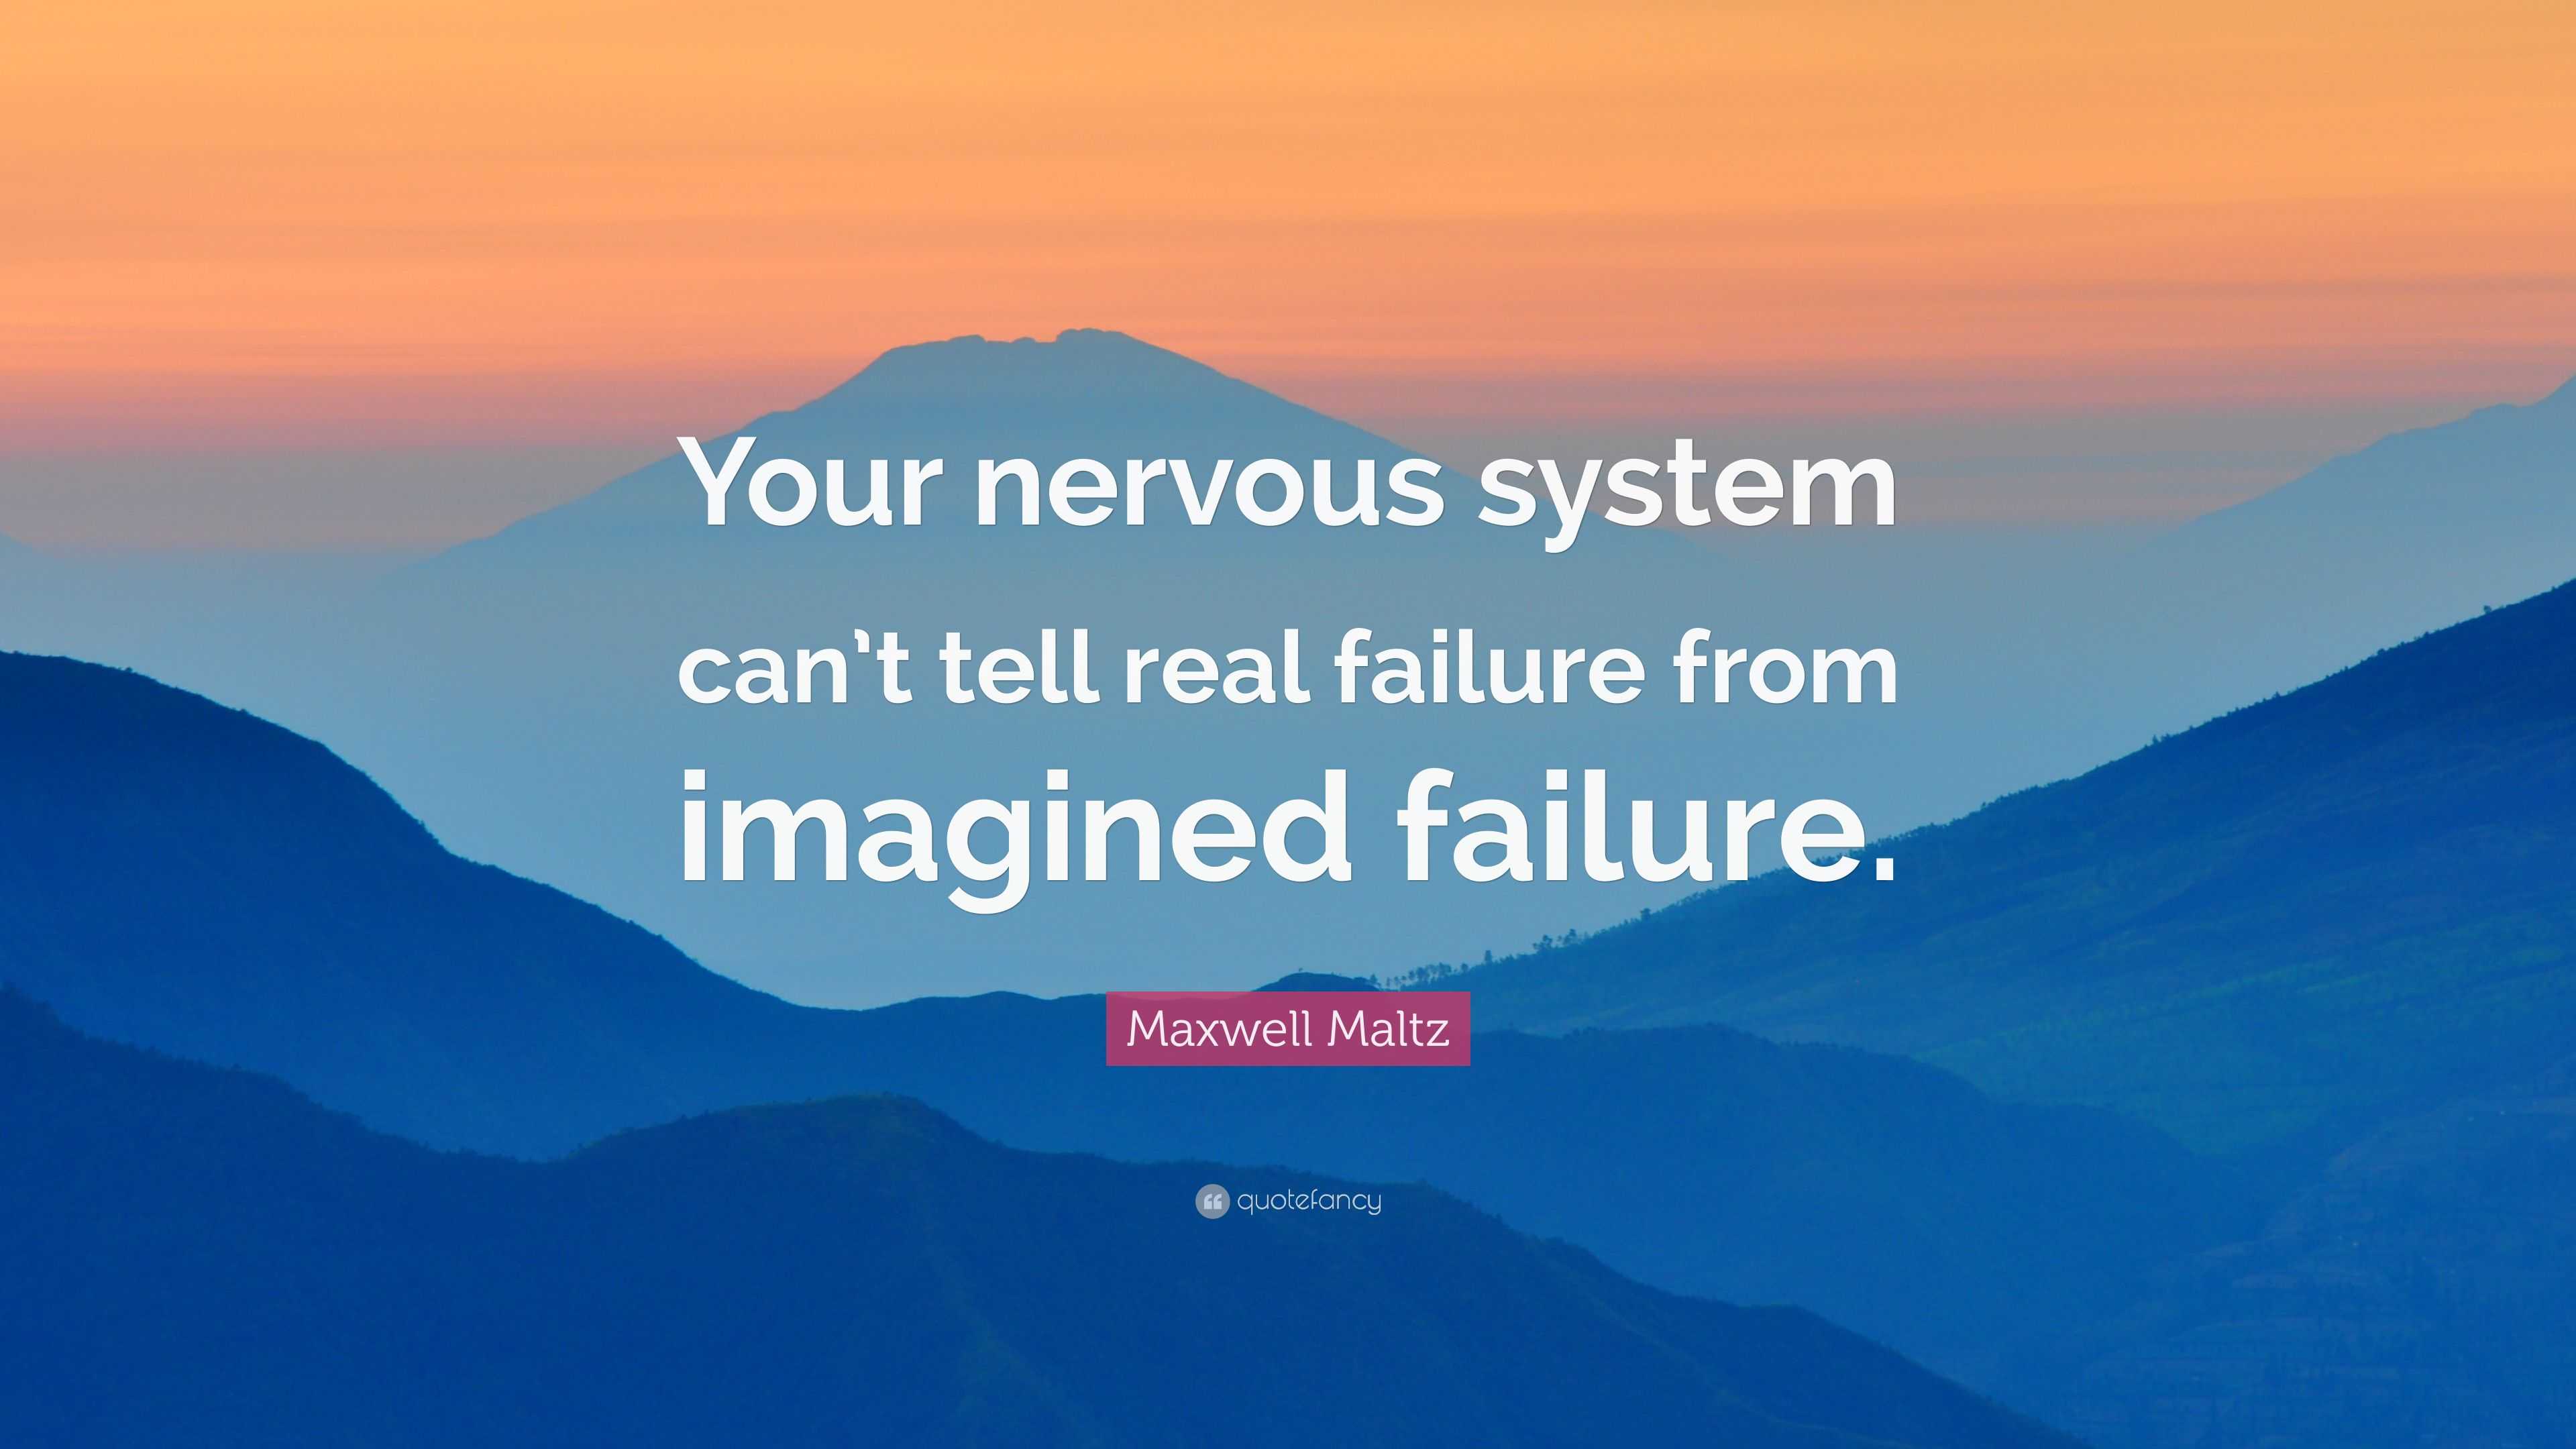 Maxwell Maltz Quote “Your nervous system can’t tell real